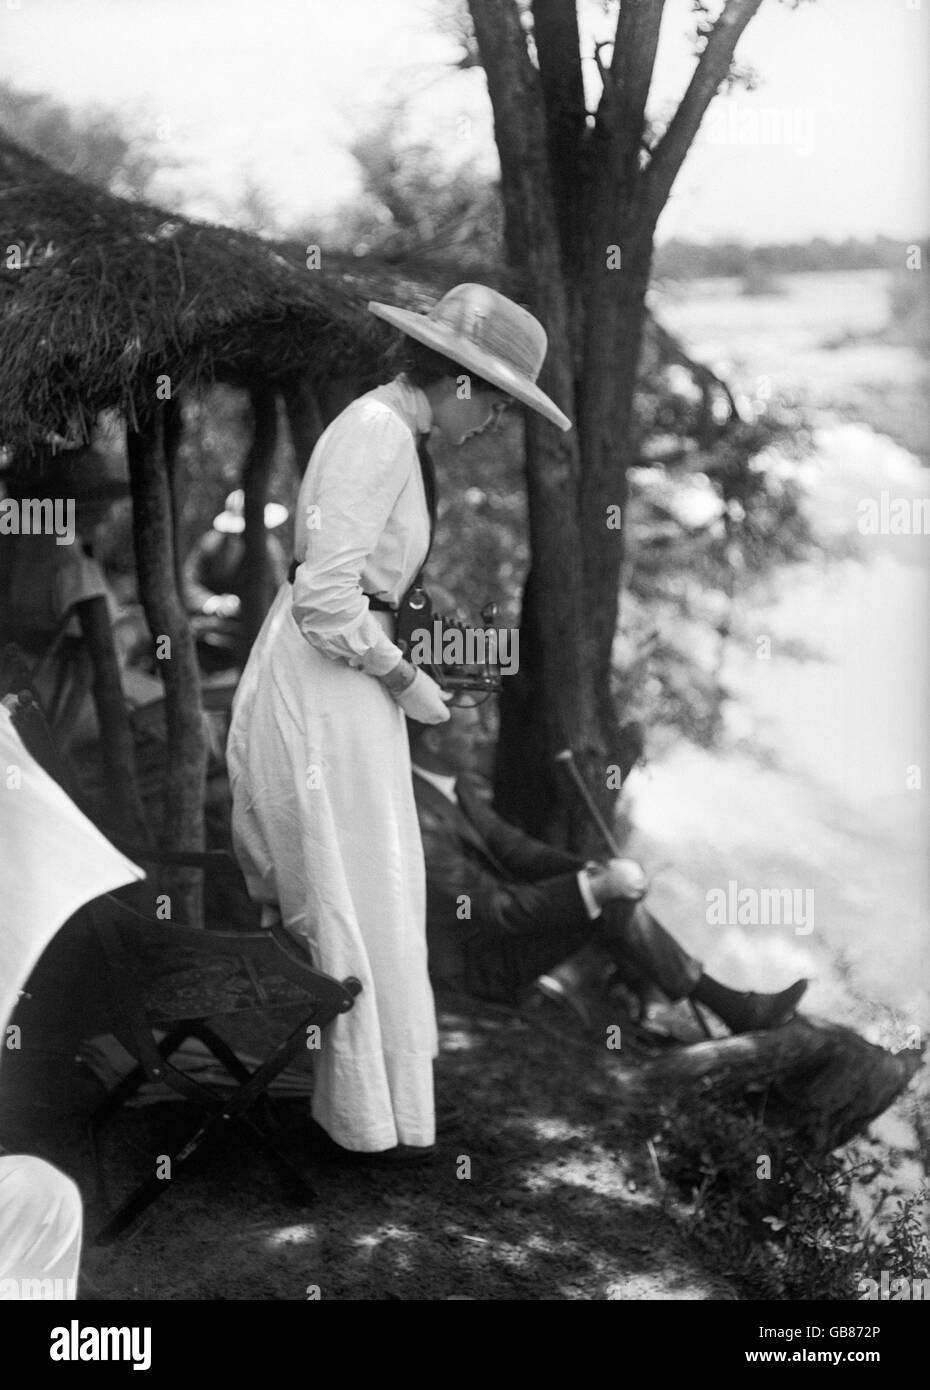 British Royalty - Princess Patricia of Connaught - South Africa - 1912 Stock Photo